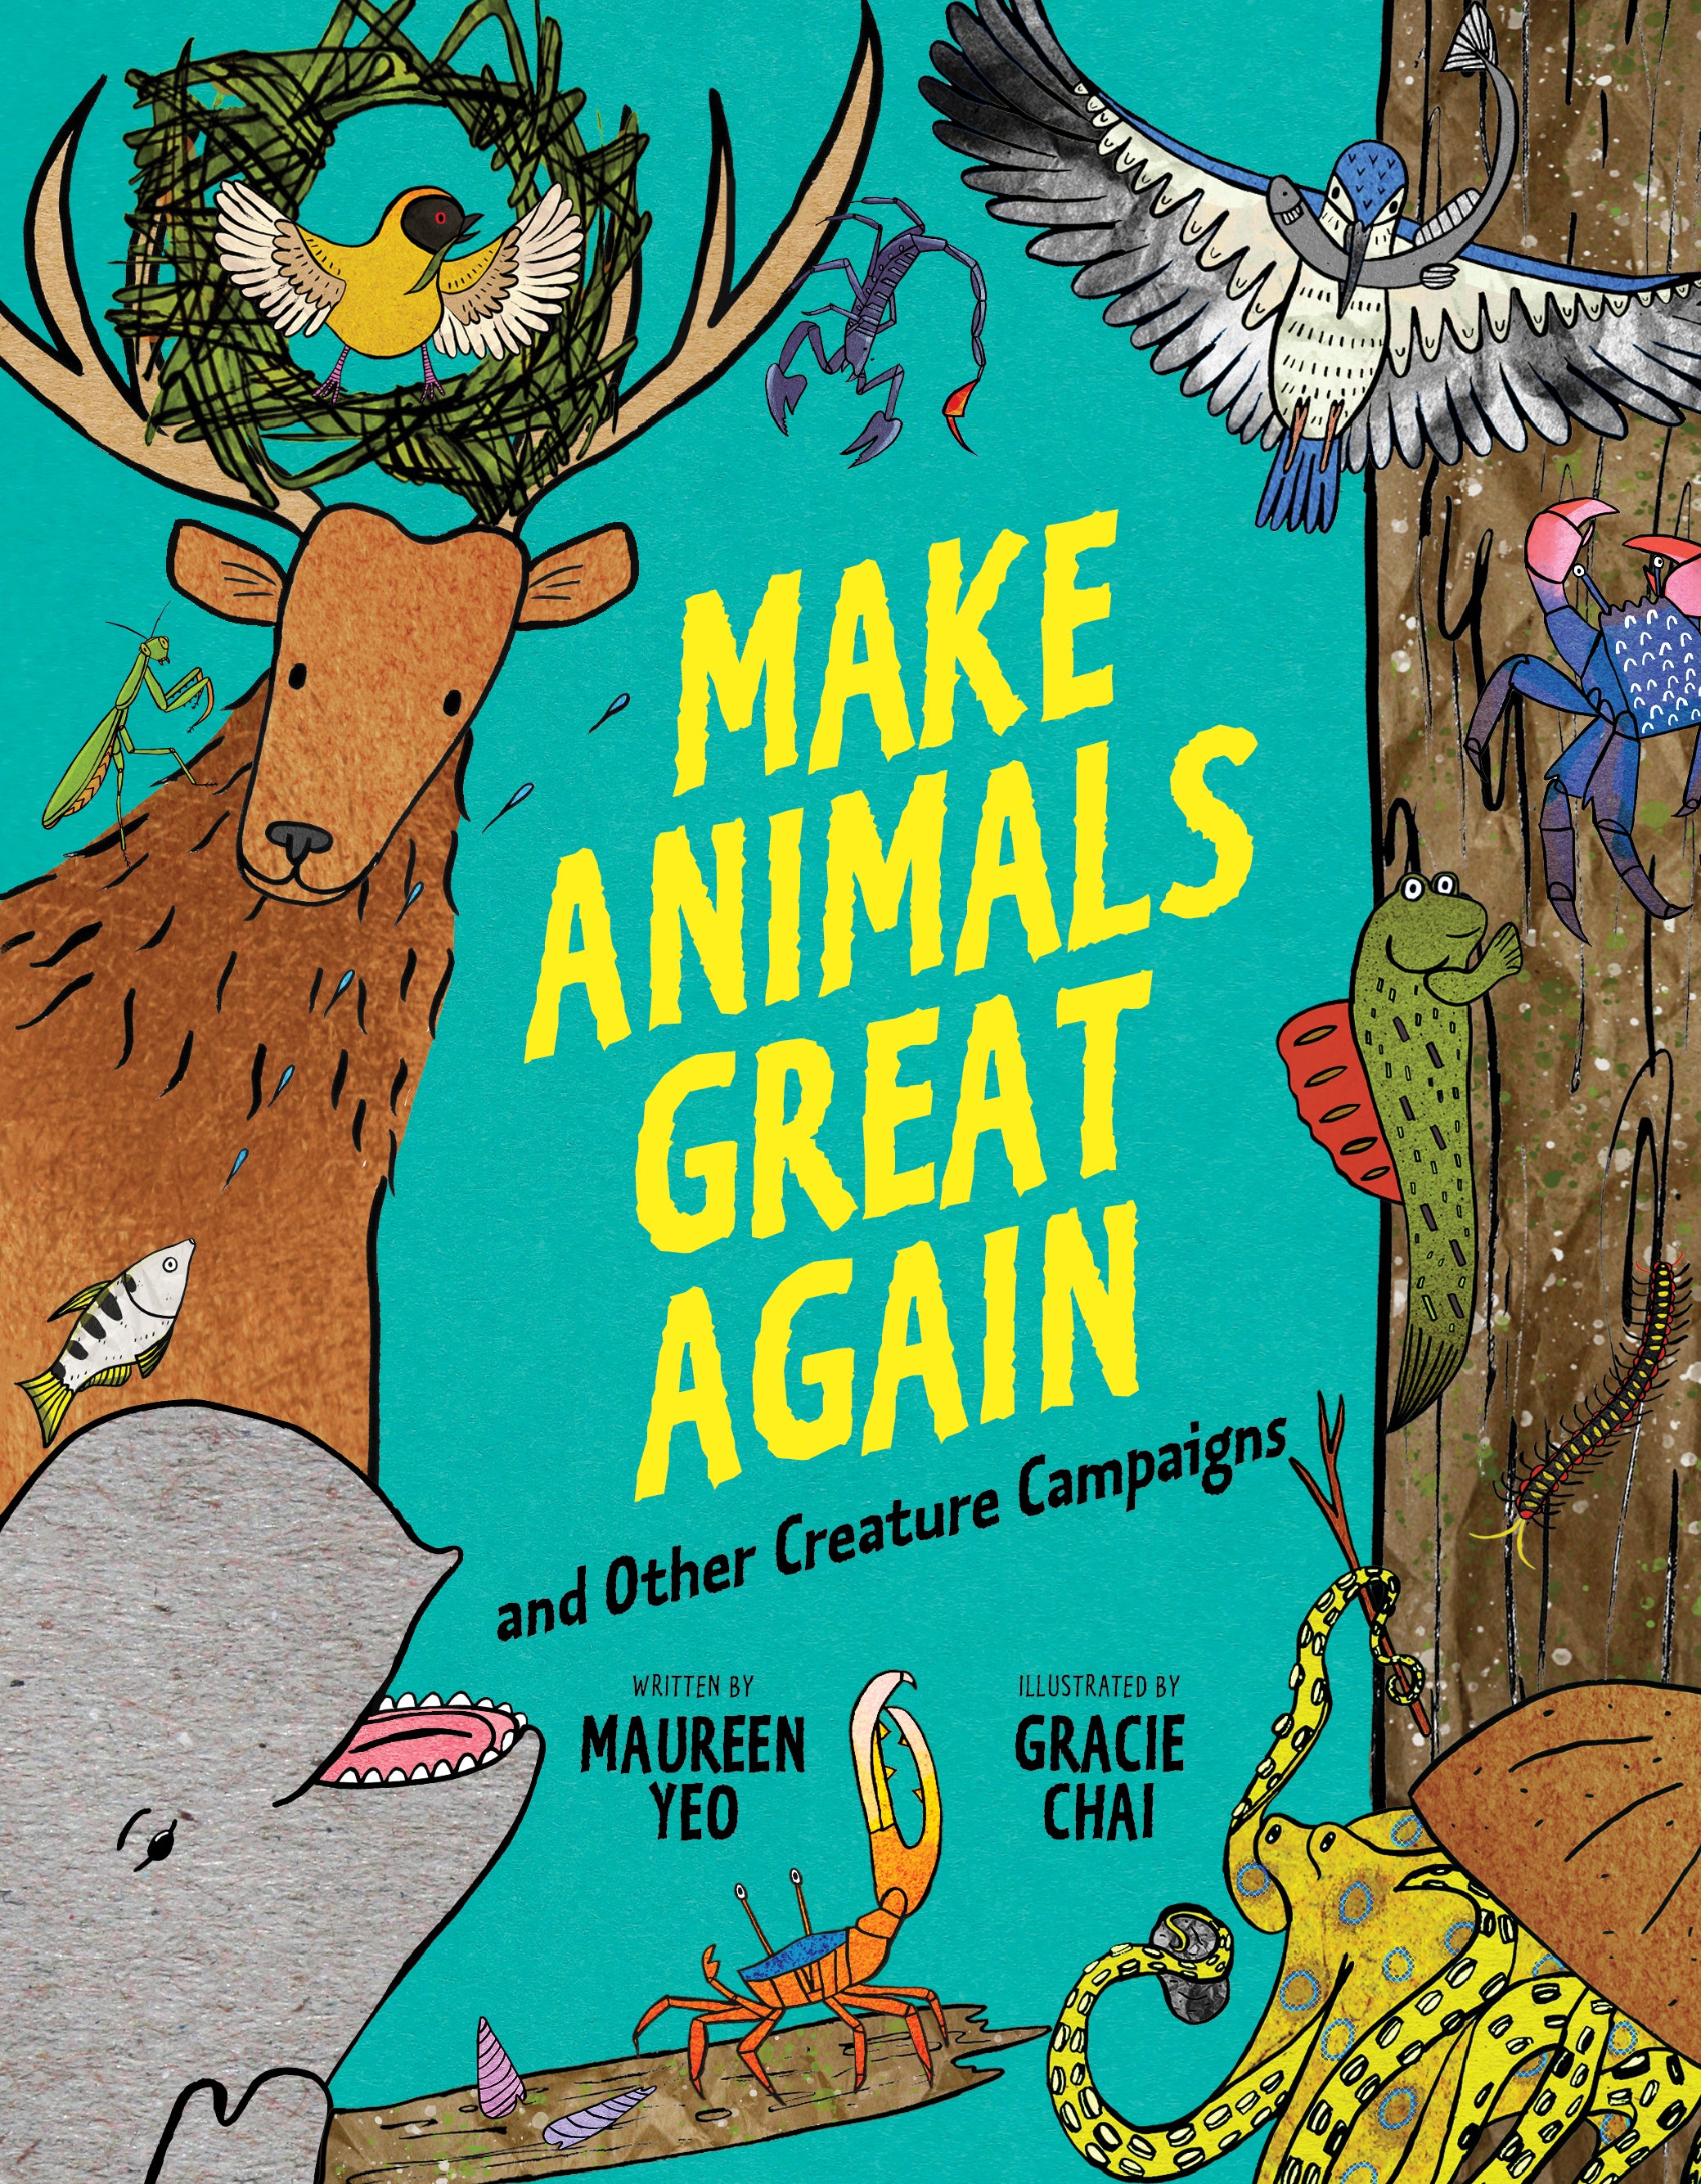 Make Animals Great Again and Other Creature Campaigns